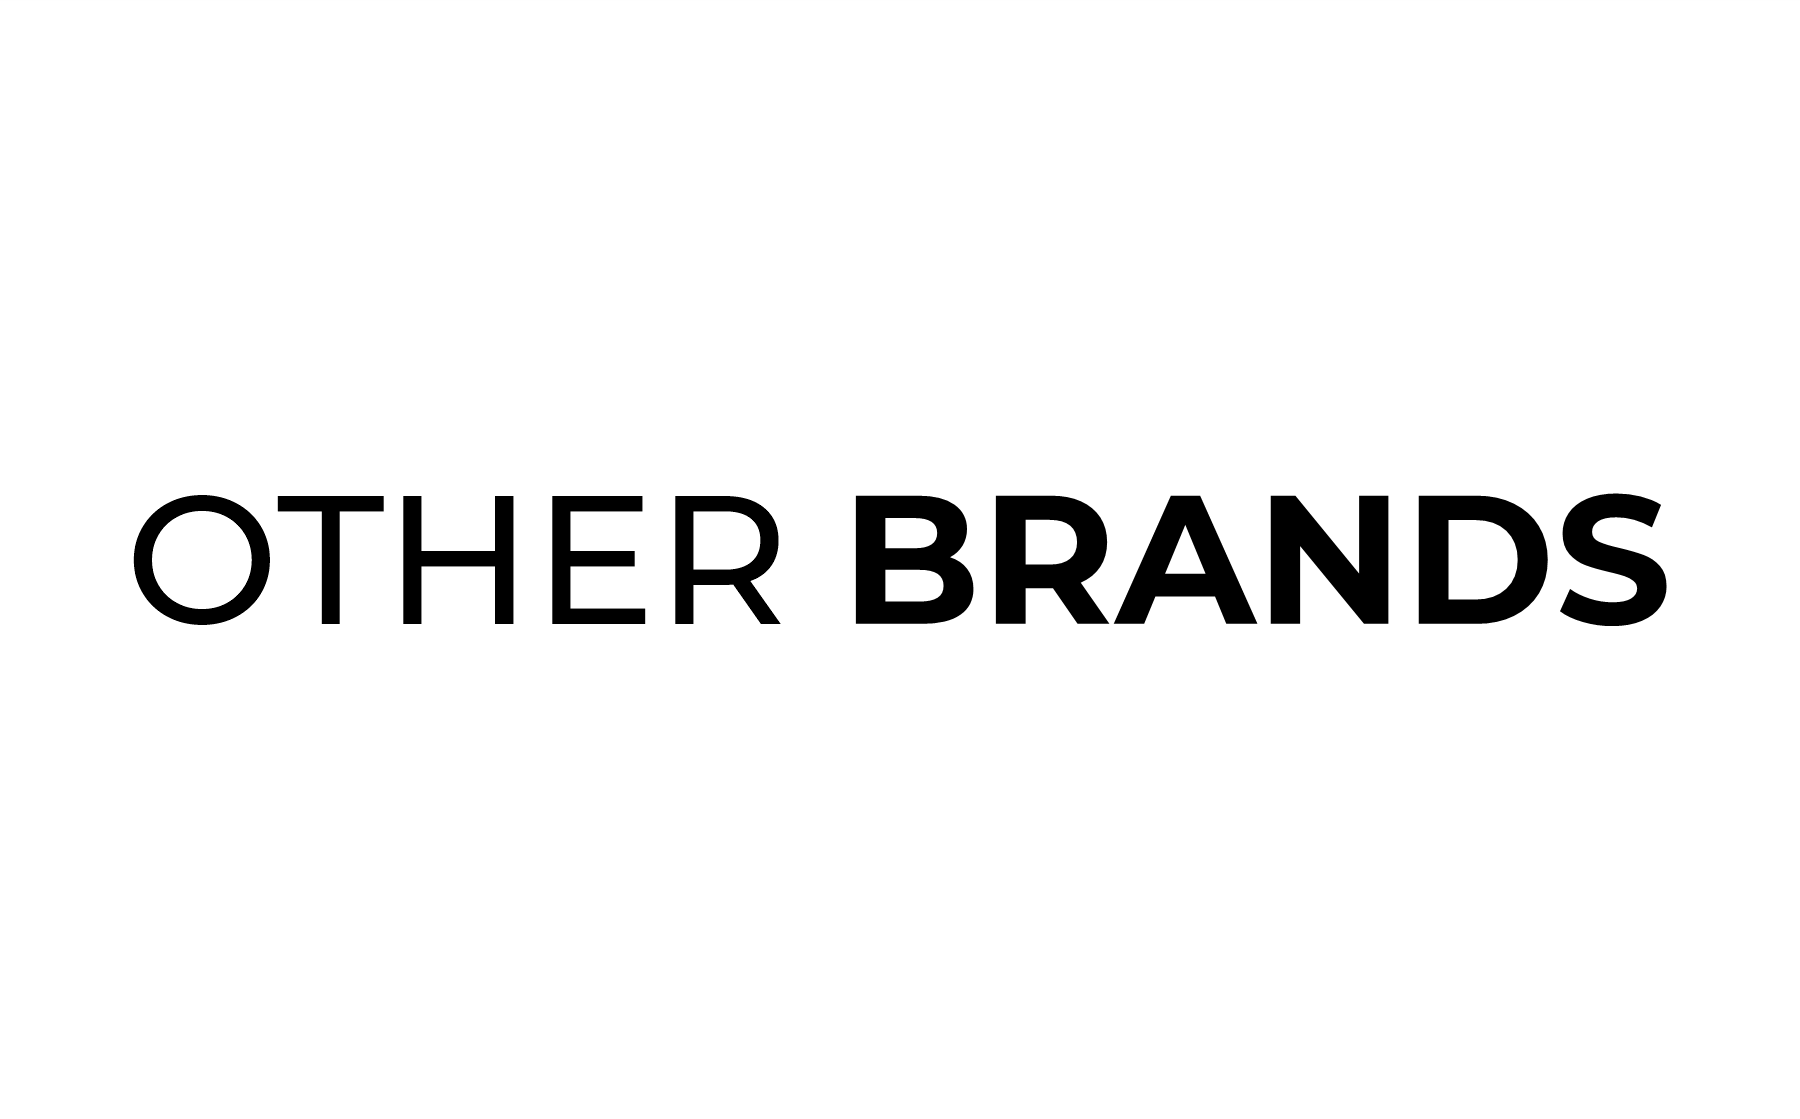 Other brand